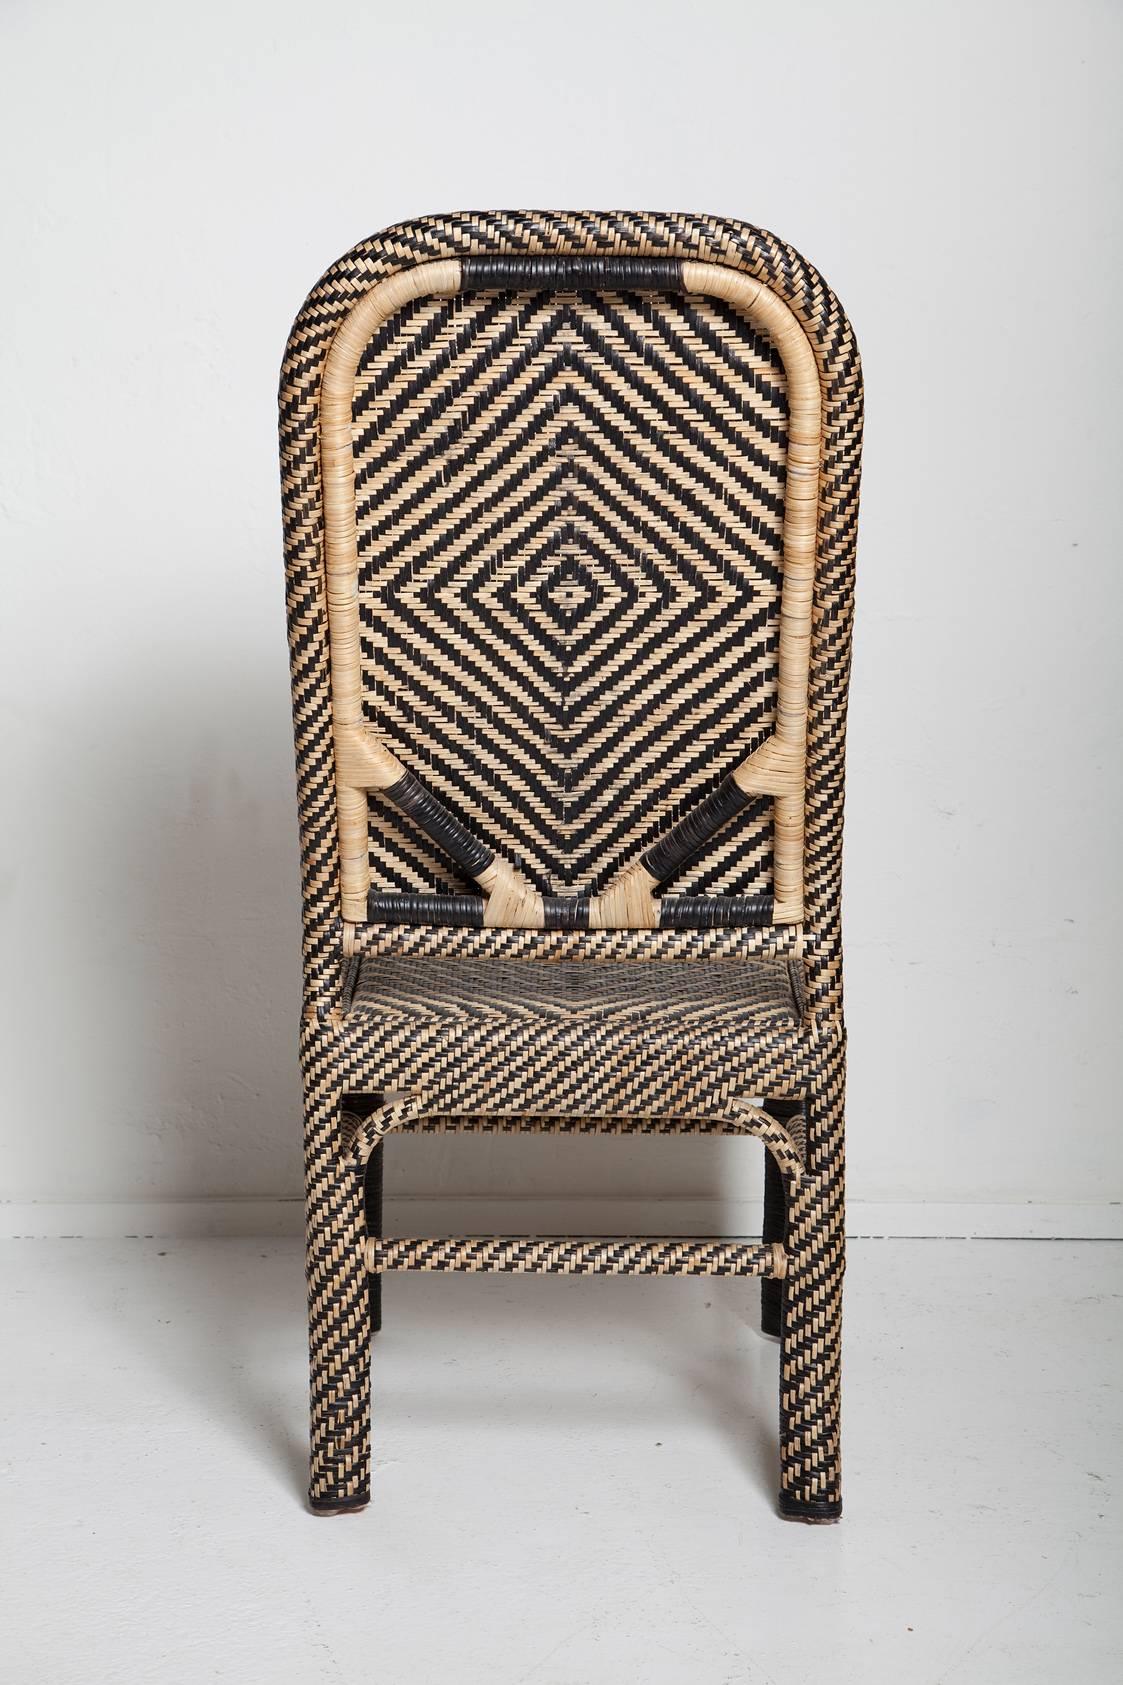 Hand-Woven Pair of Woven Rattan Armchairs